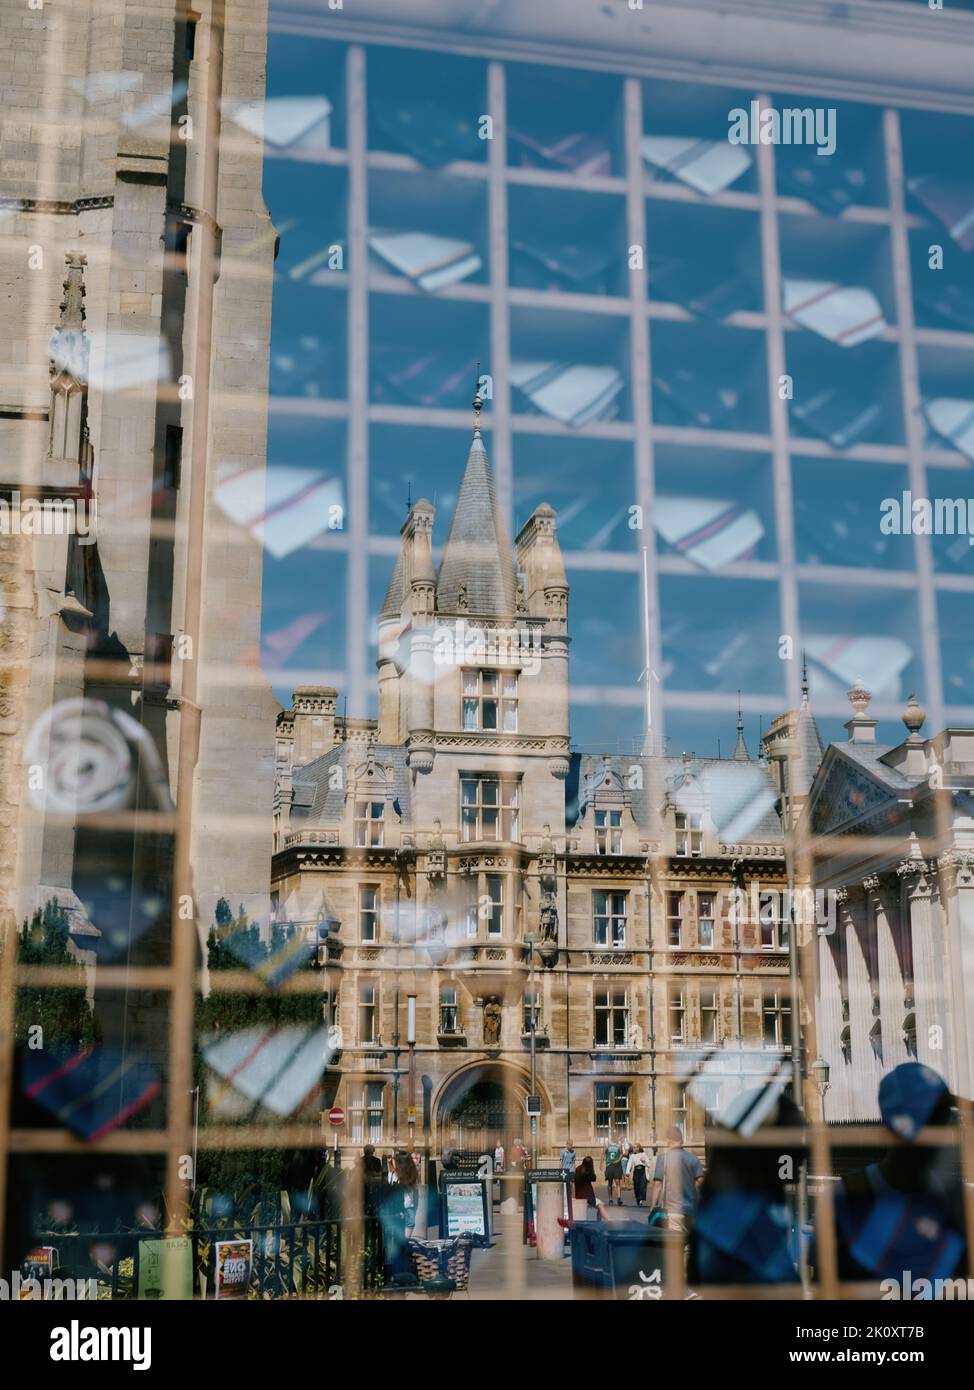 University of Cambridge ties on display in an outfitter shop window in with the historic architecture reflected, Cambridge Cambridgeshire England UK Stock Photo